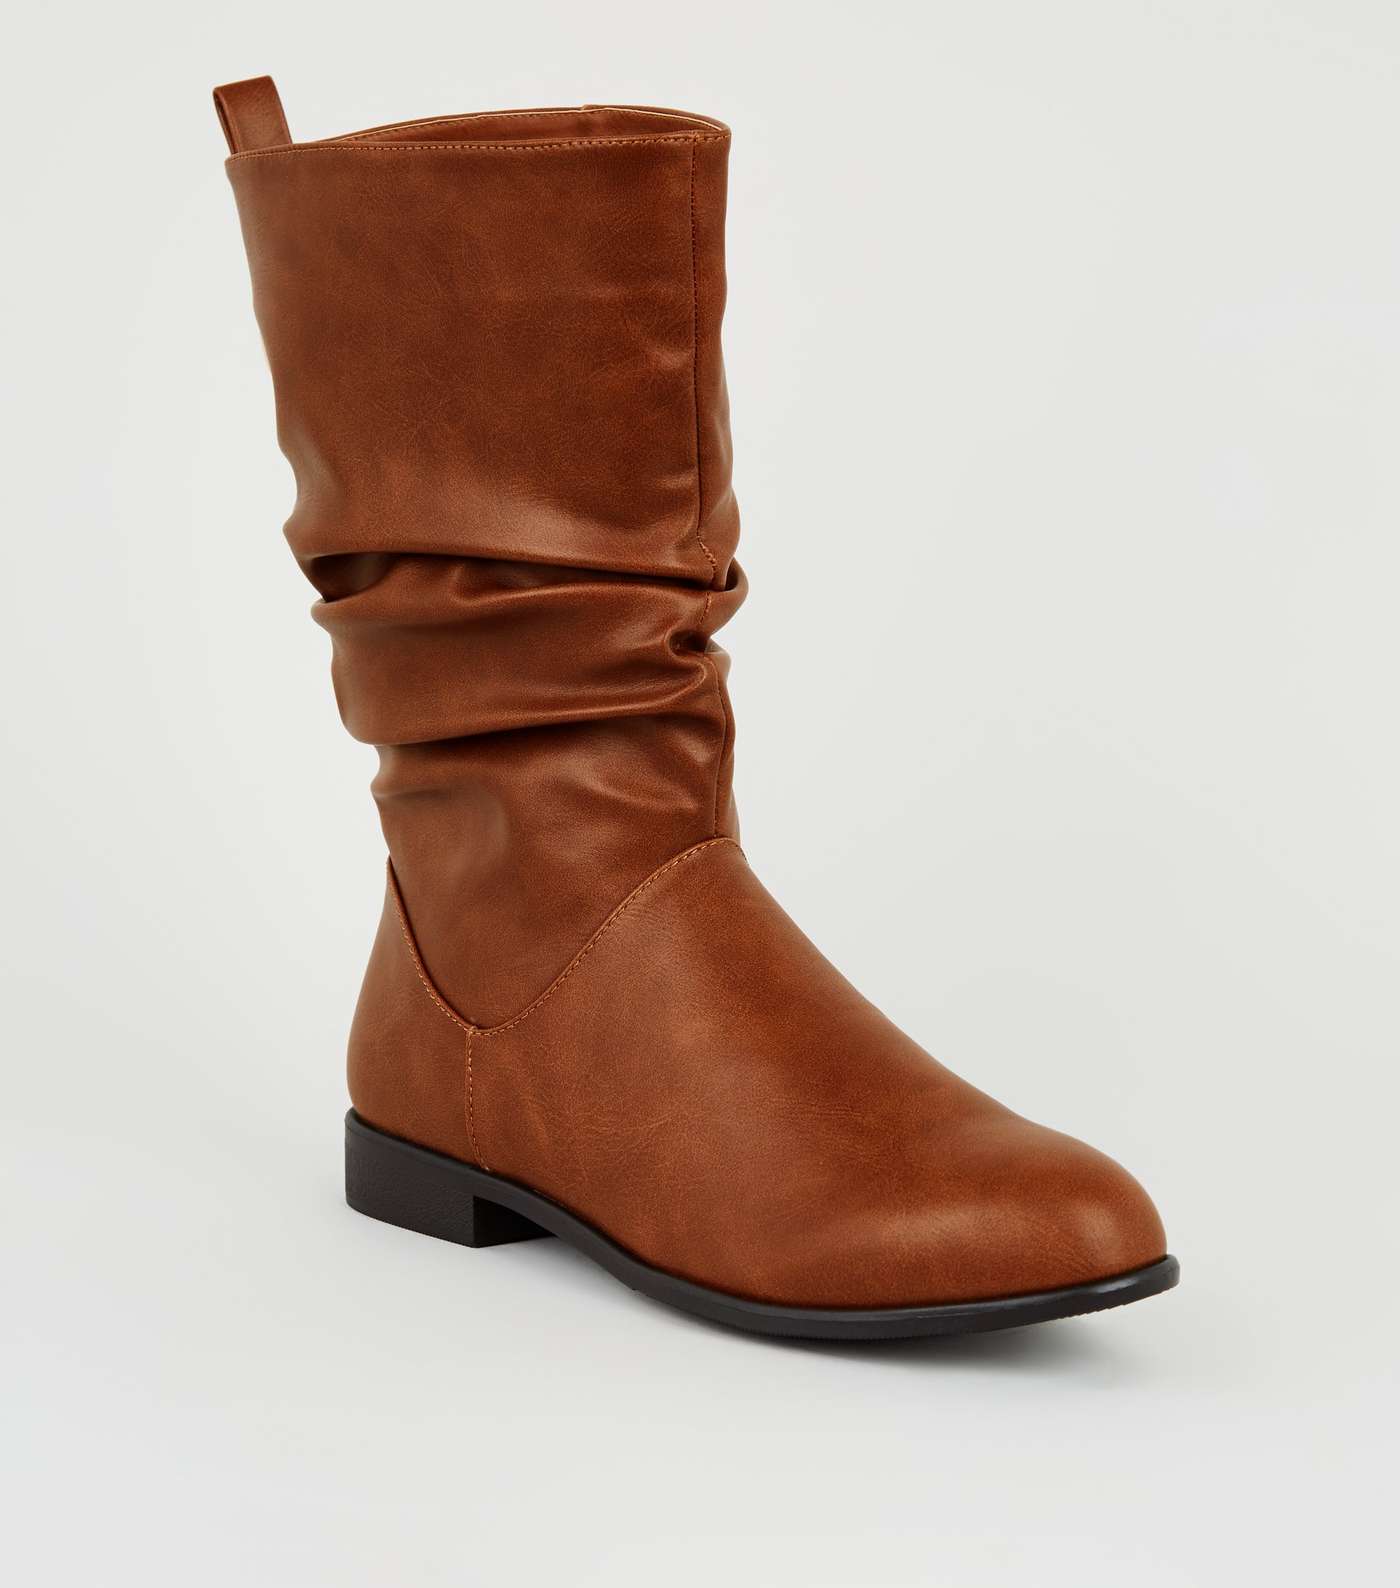 Tan Leather-Look Slouch Calf Boots